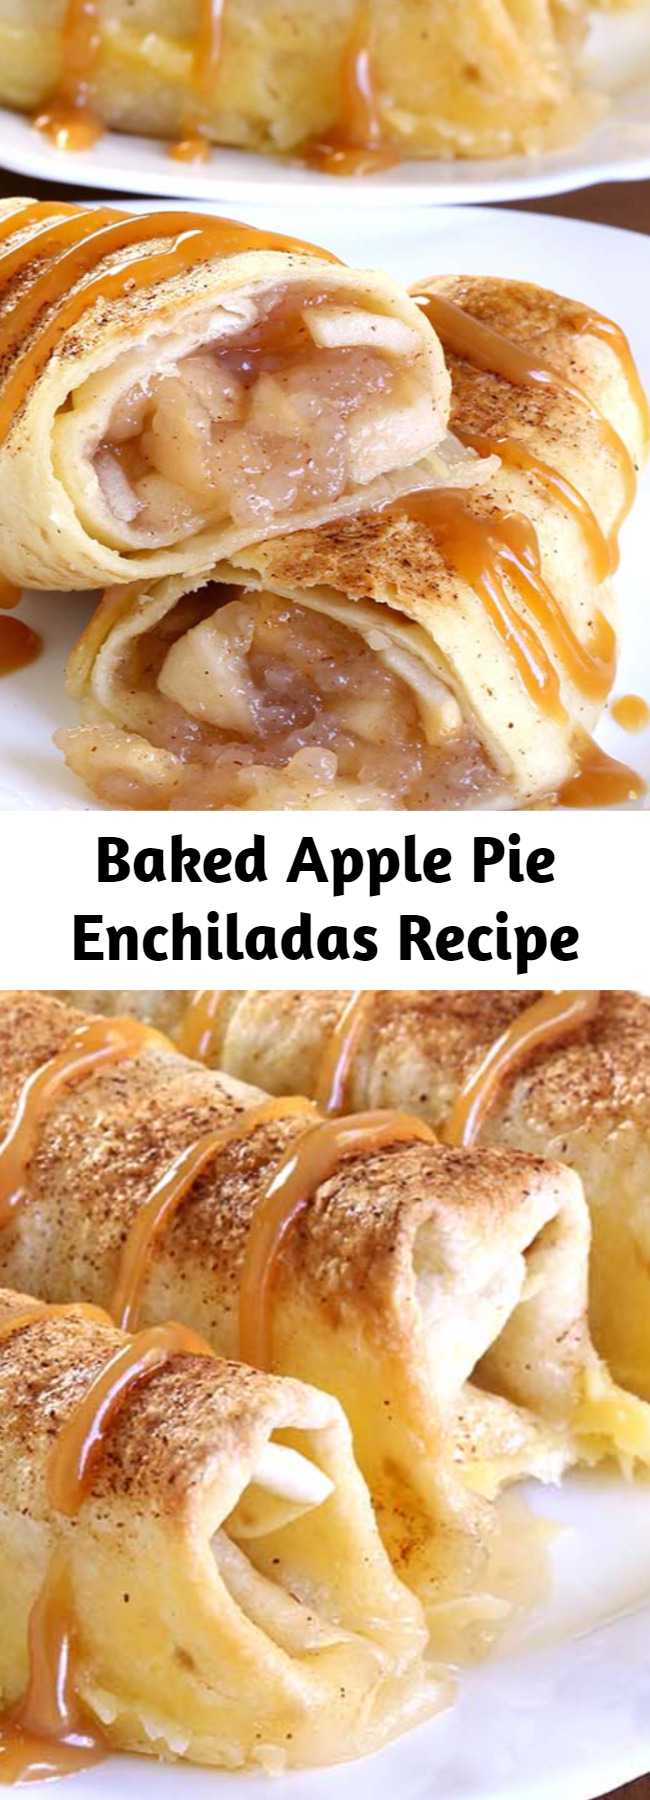 Baked Apple Pie Enchiladas Recipe - This recipe give you all the cinnamony goodness of hot apple pie stuffed securely into a tortilla and drizzled with caramel sauce.